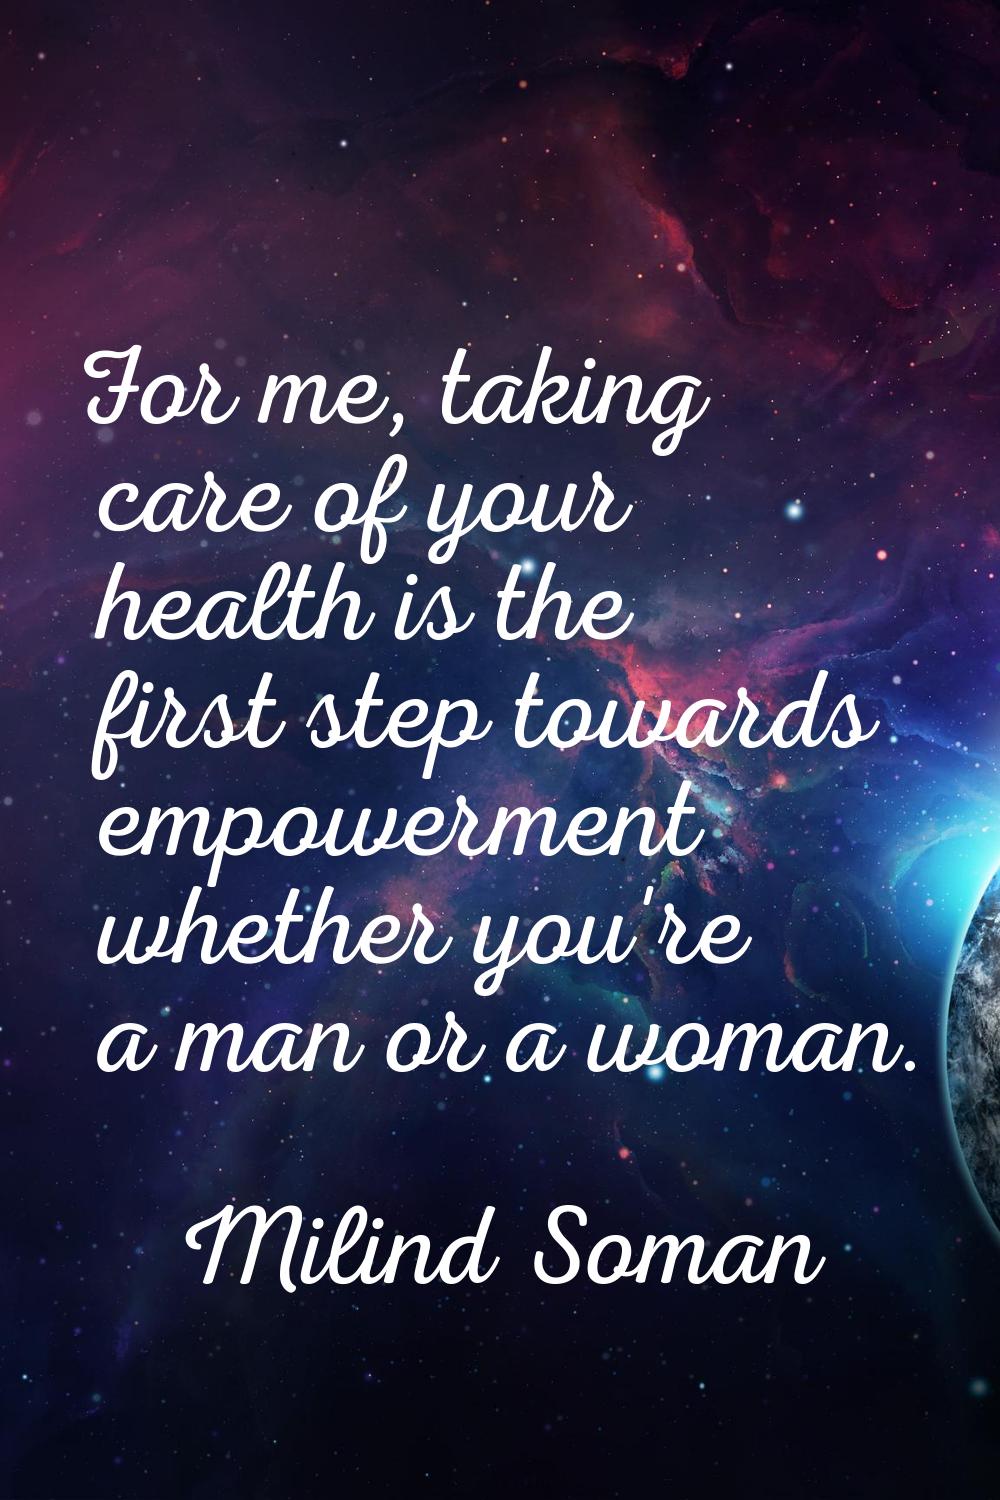 For me, taking care of your health is the first step towards empowerment whether you're a man or a 